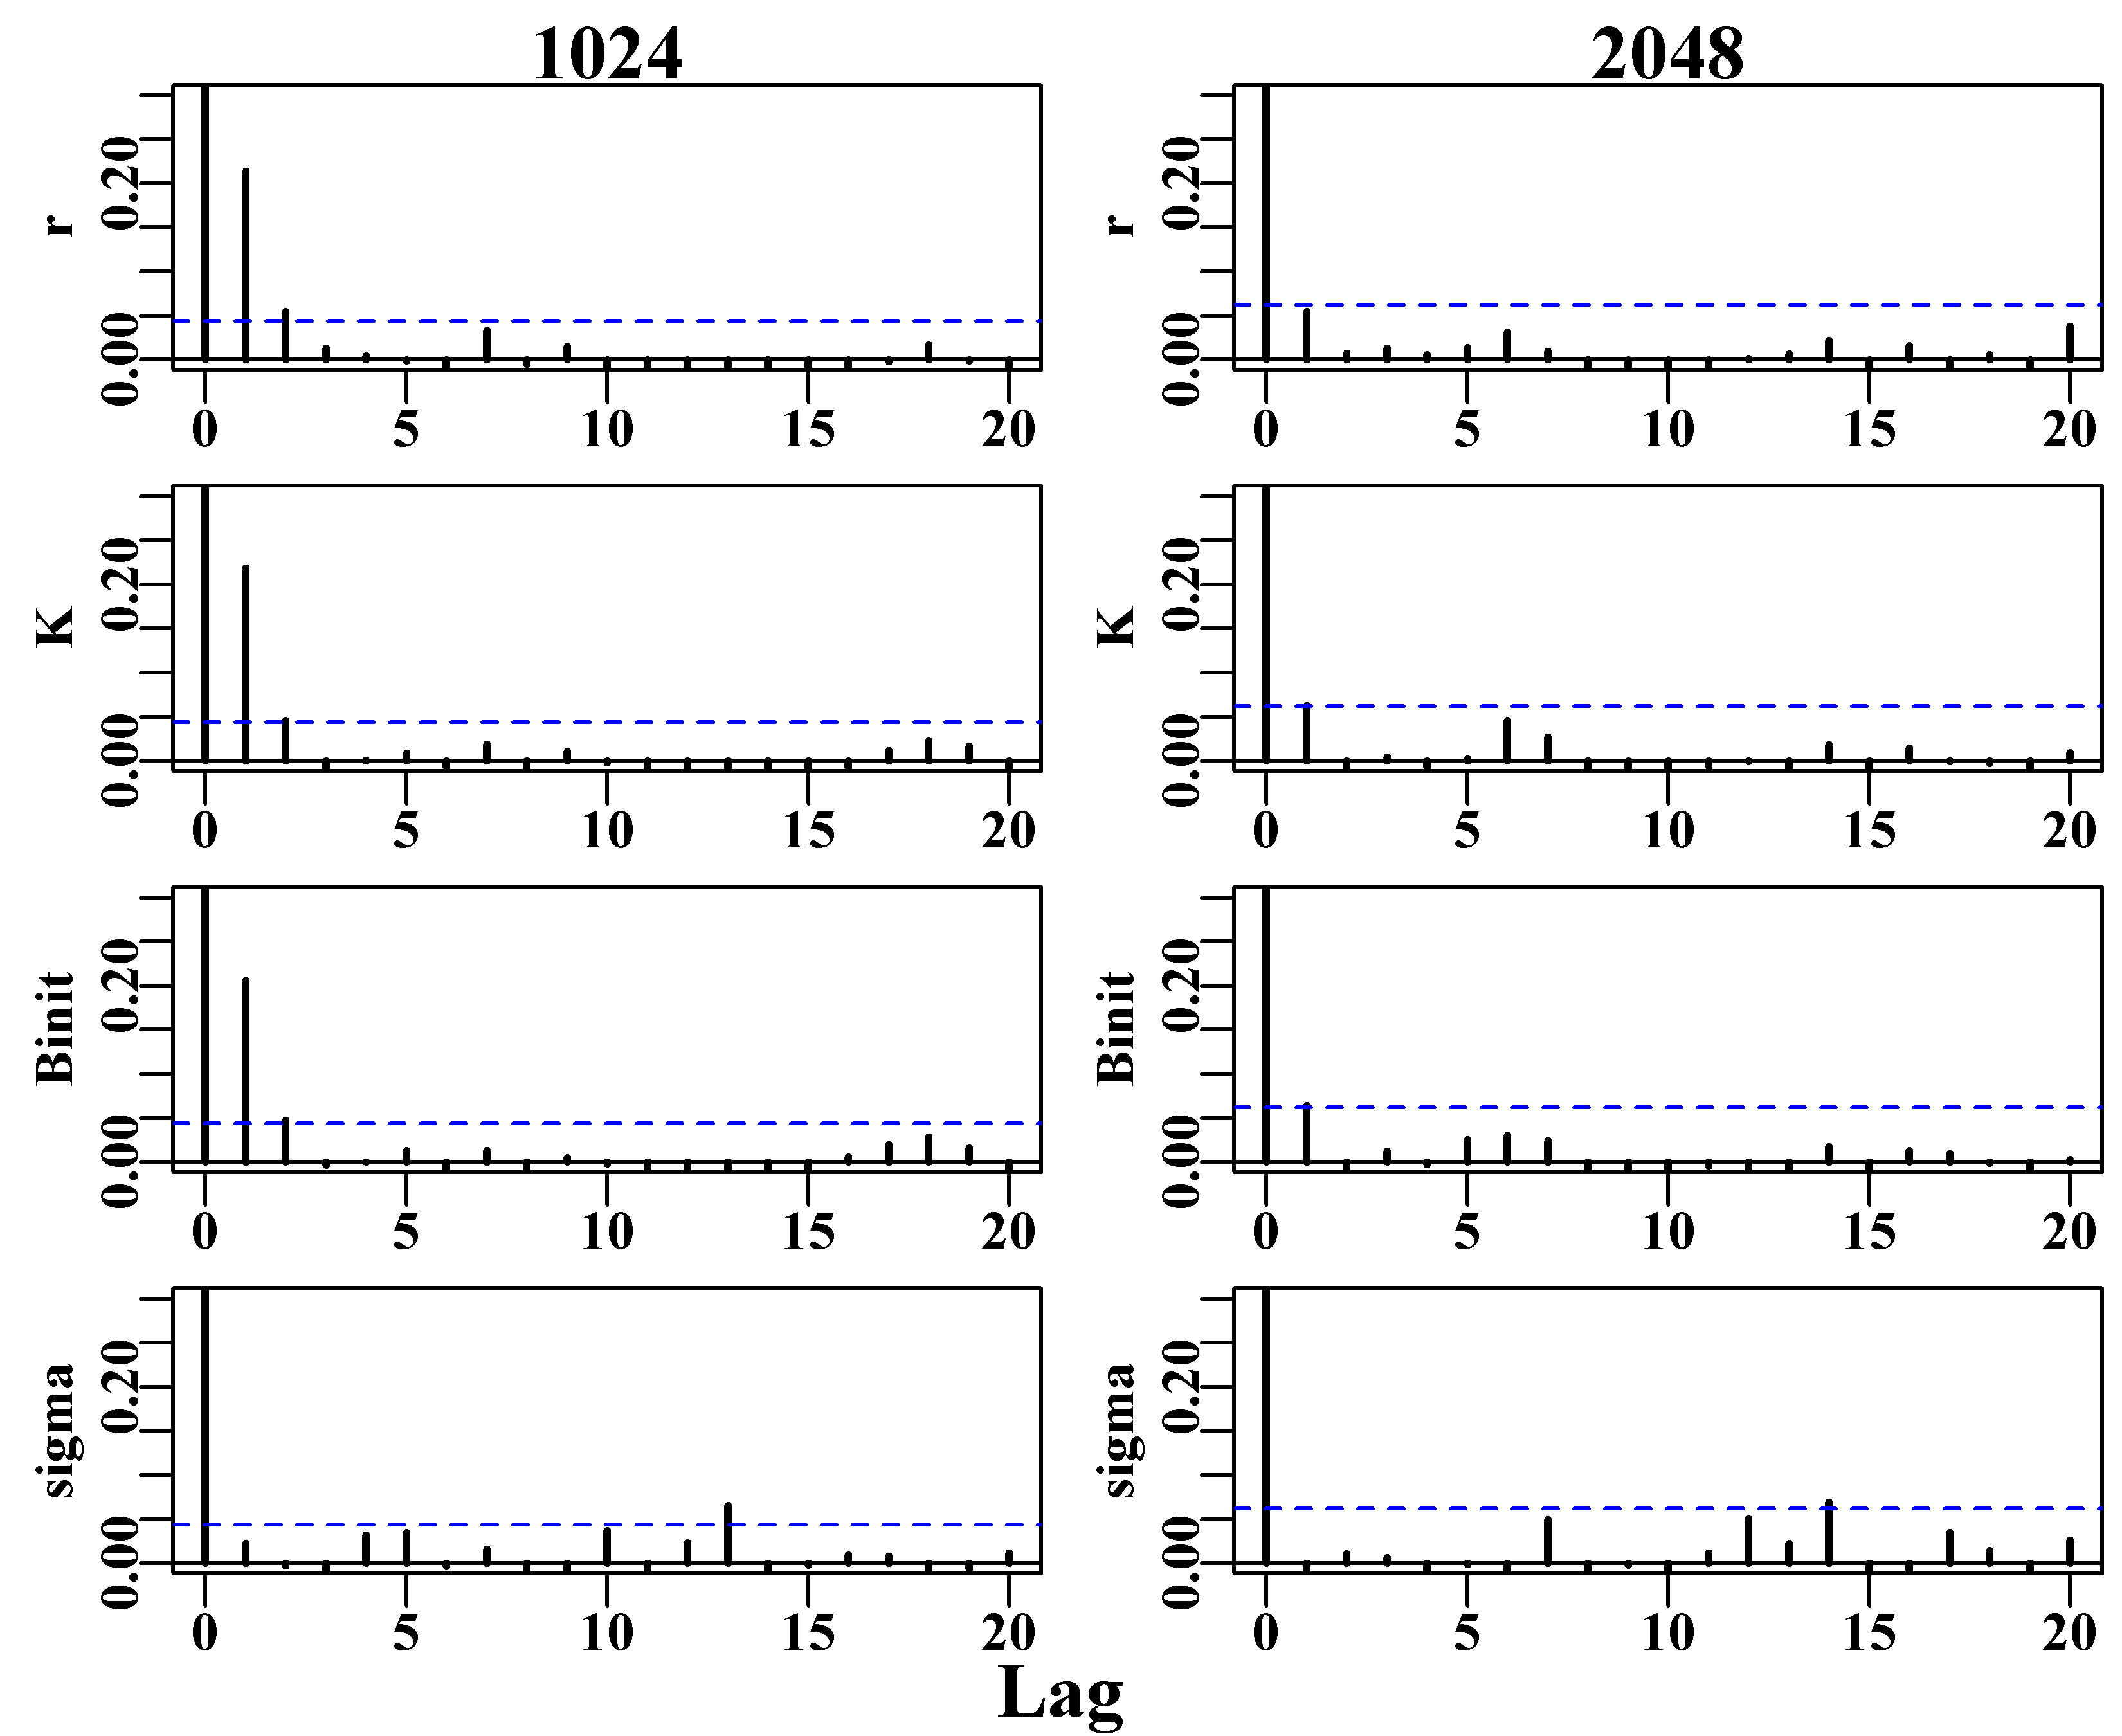 The auto-correlation of two chains across the four parameters of the Schaefer model with combined thinning rates of 1024 and 2048. Note the reduced maximum on the y-axis to make the differences between the two more apparent.